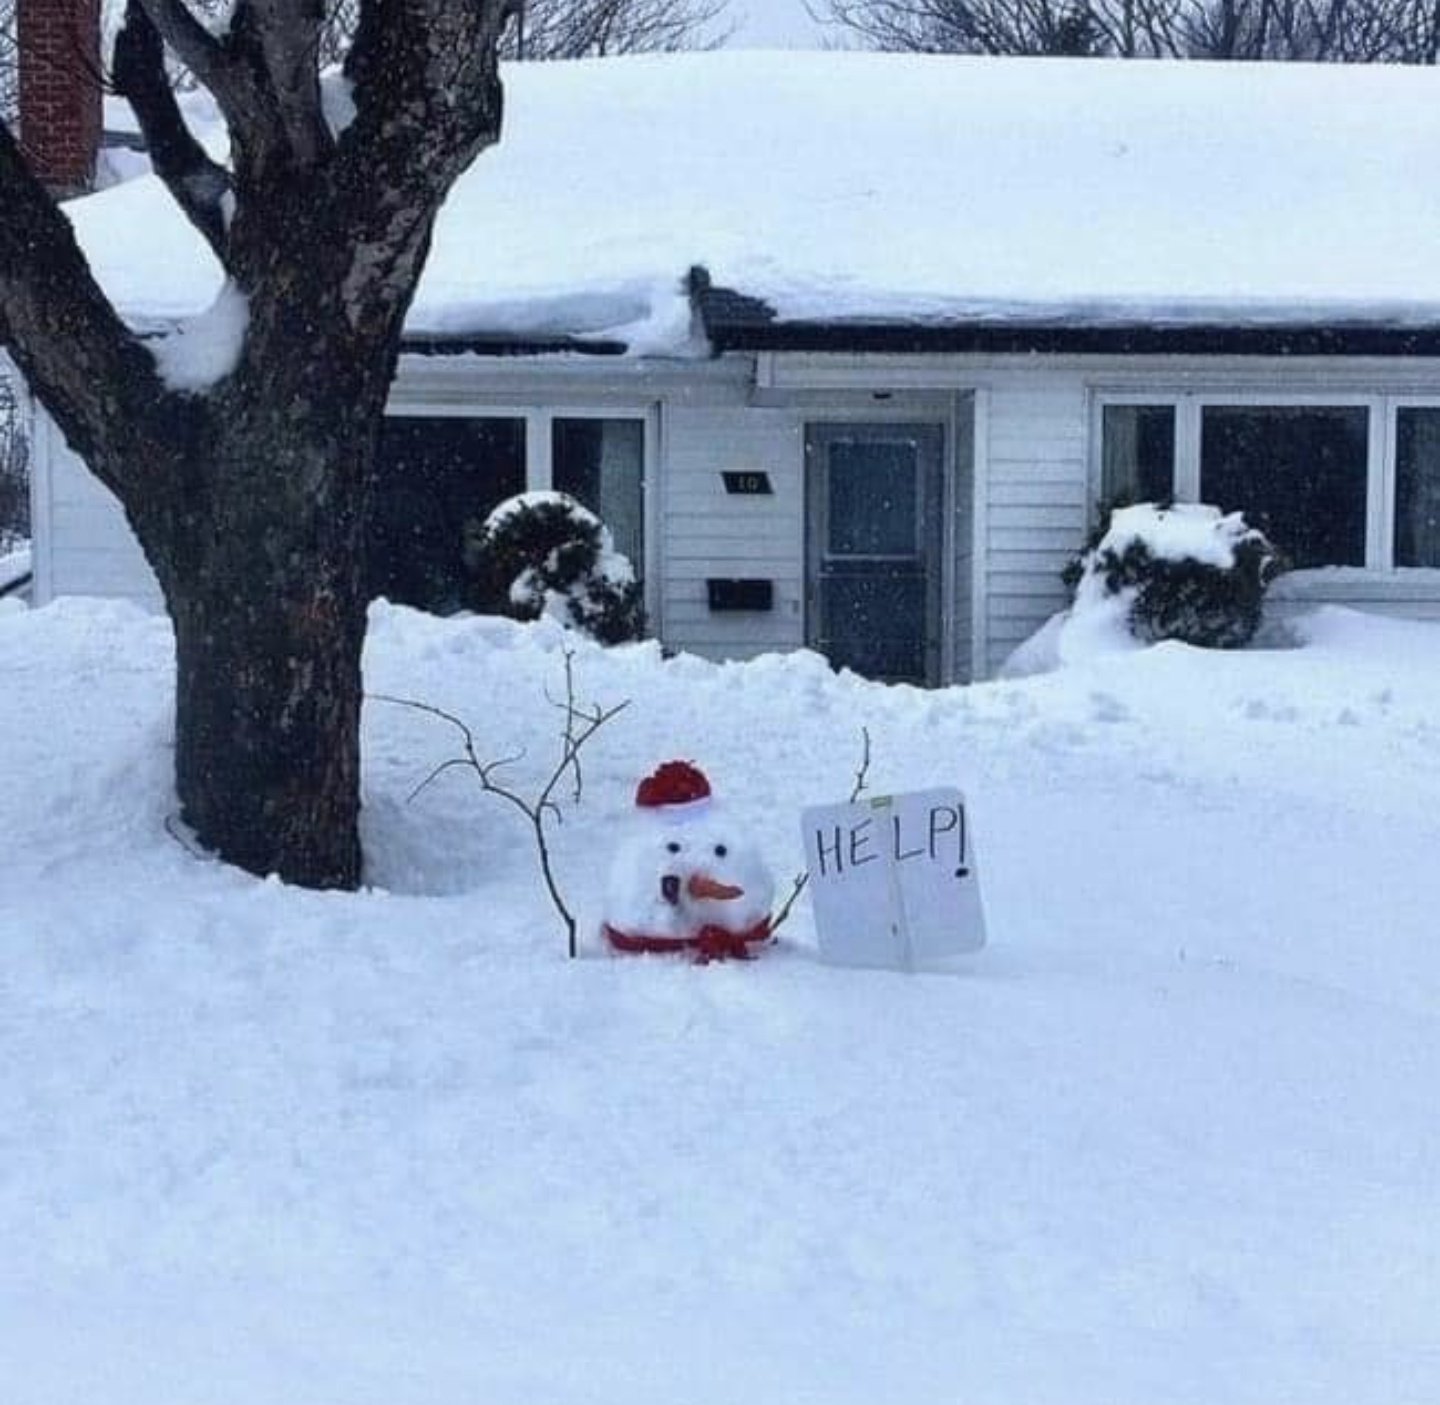 Snowman holding up a sign that says "help" as he drowns in deep snow.